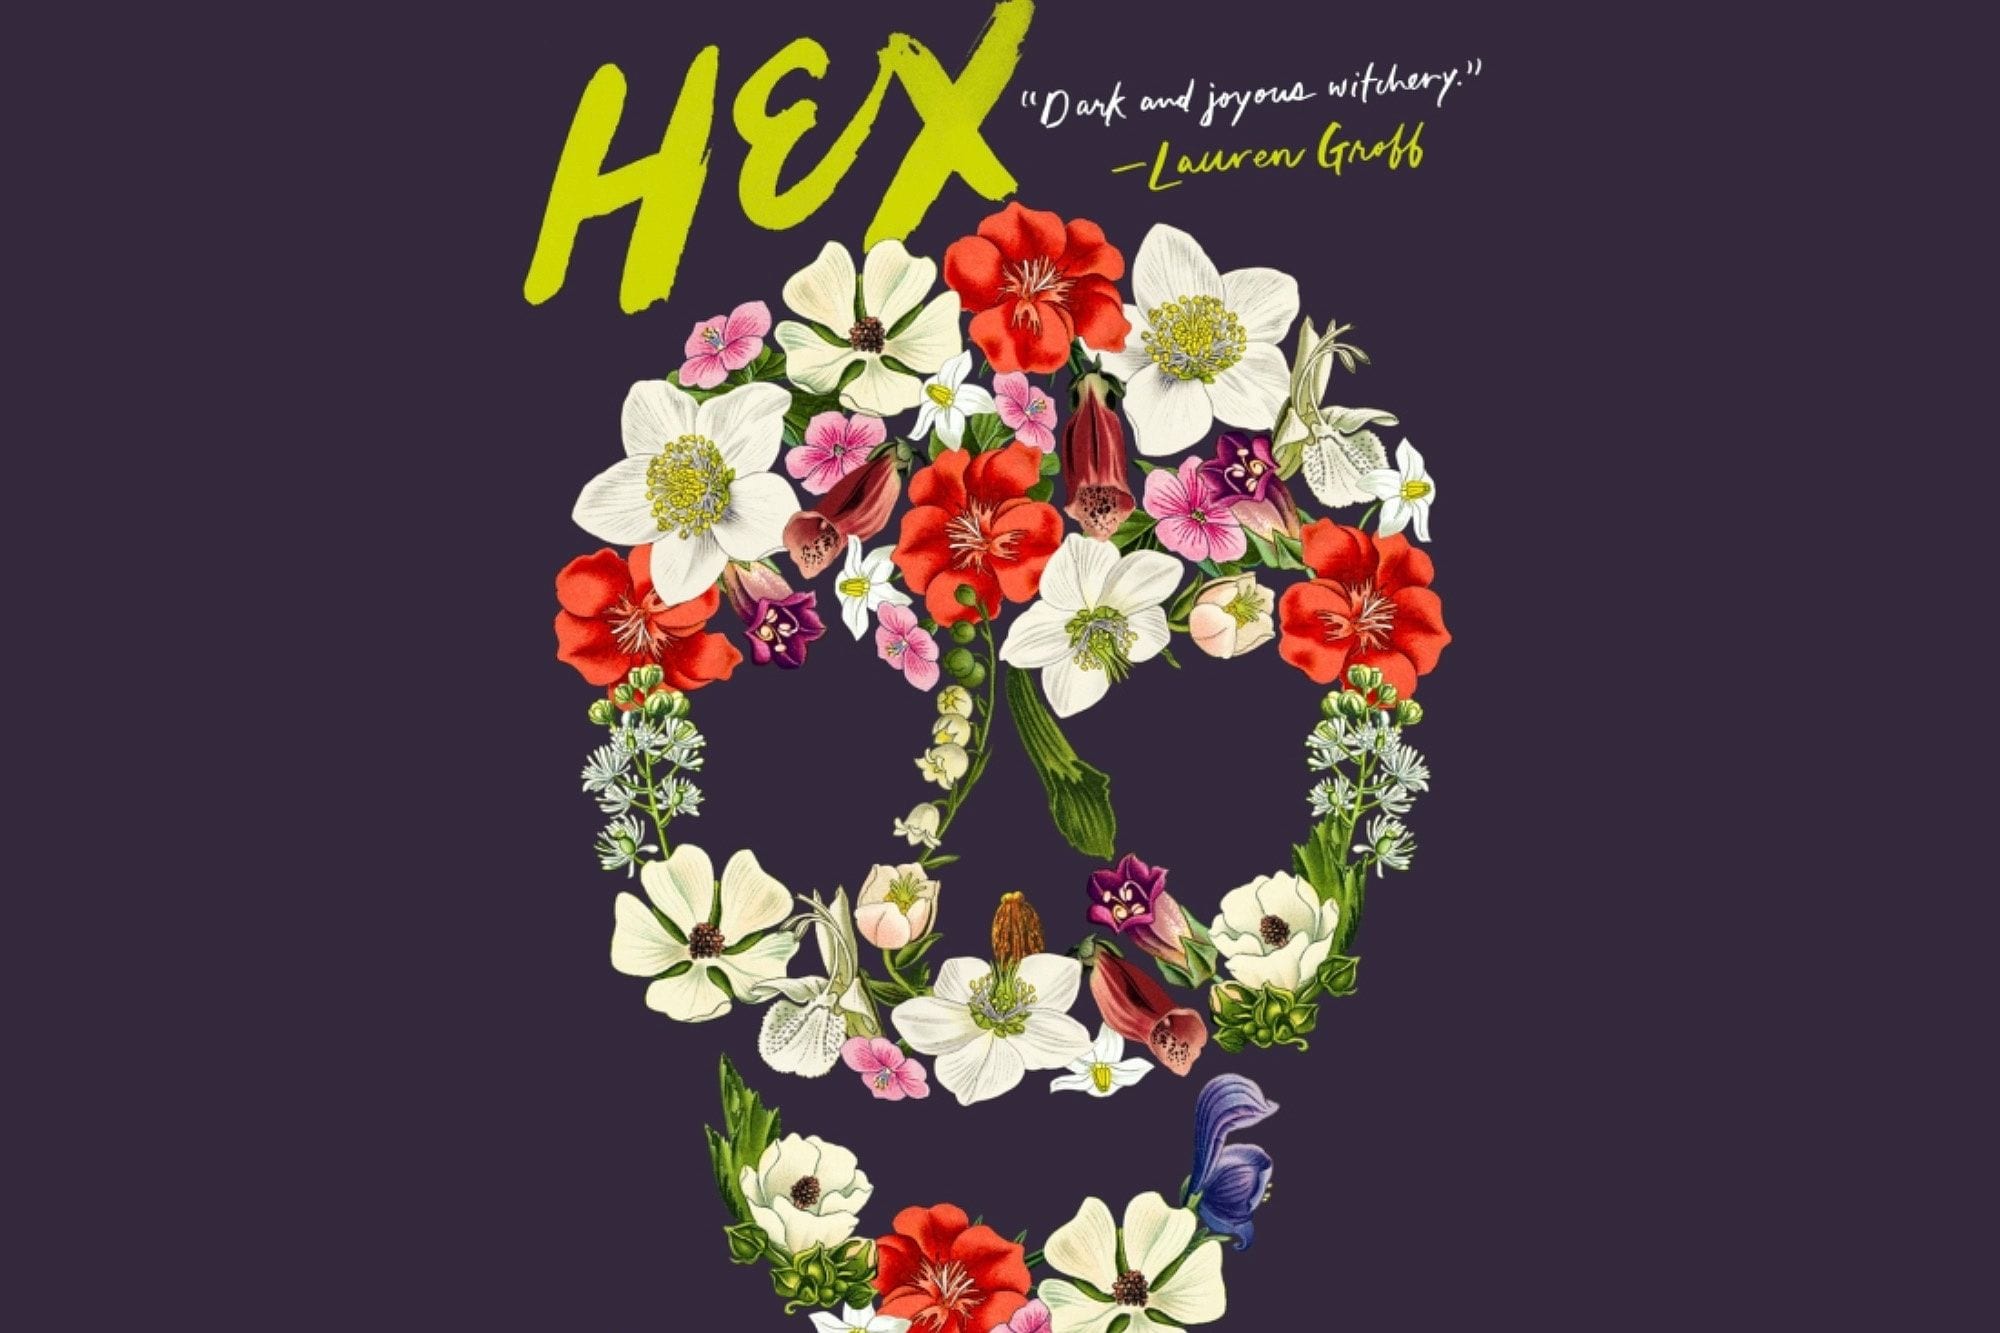 ‘Hex’ Drinks Deeply from the Poisoned Chalice